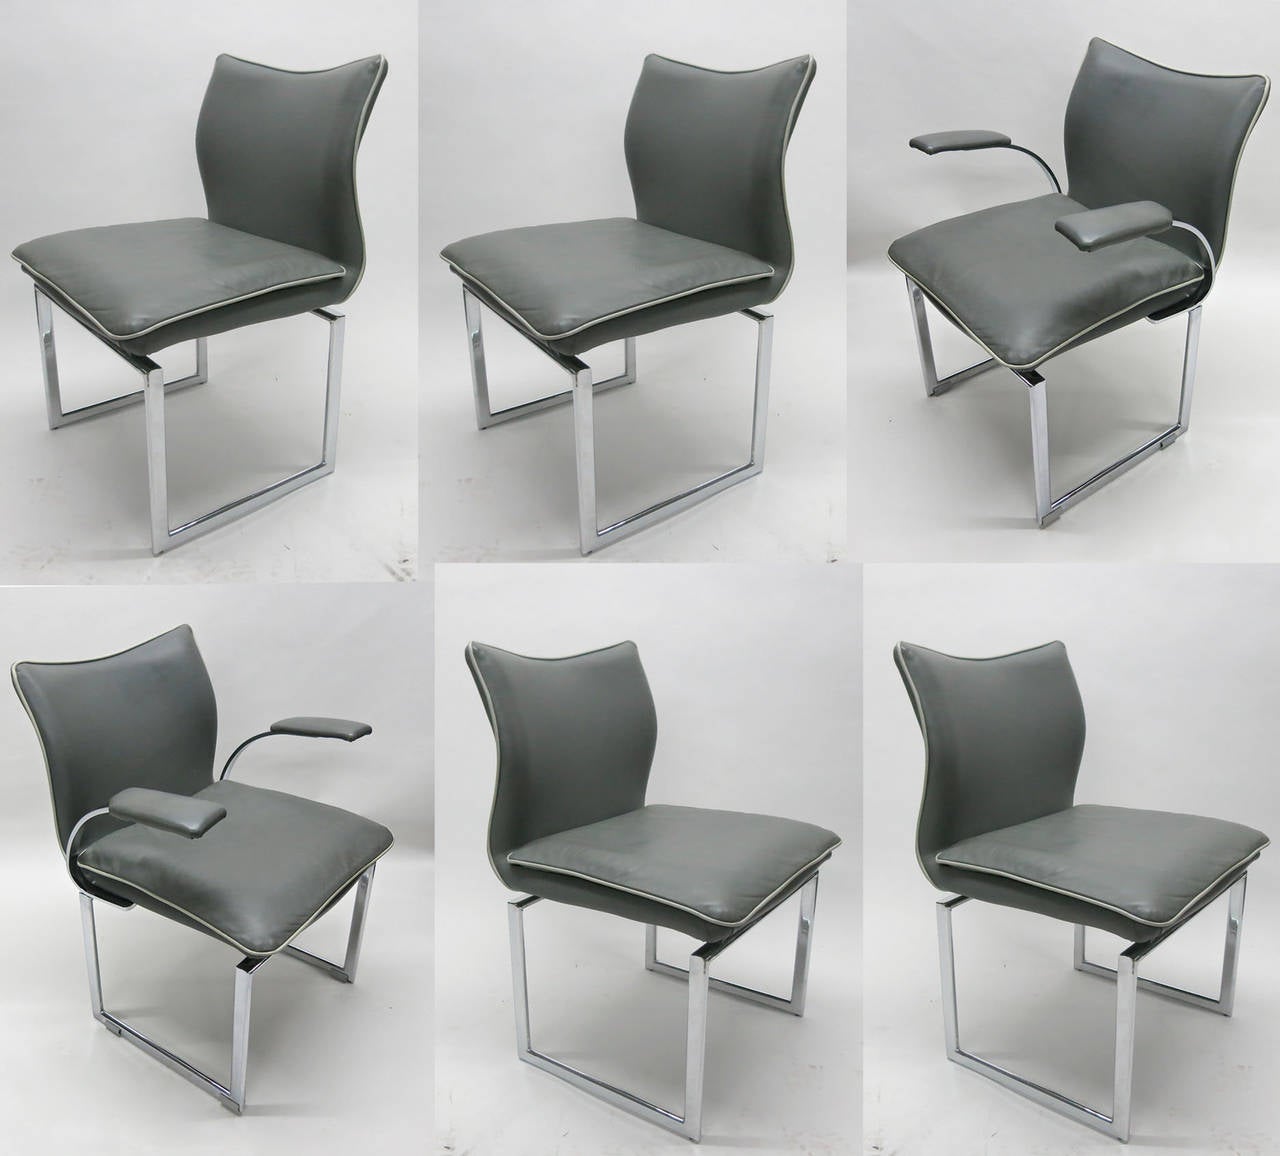 Two arm and four side chairs each have grey leather seats and back with white stitching, In near perfect original Condition, supported by a polished steel base. Two with ams and four with out.